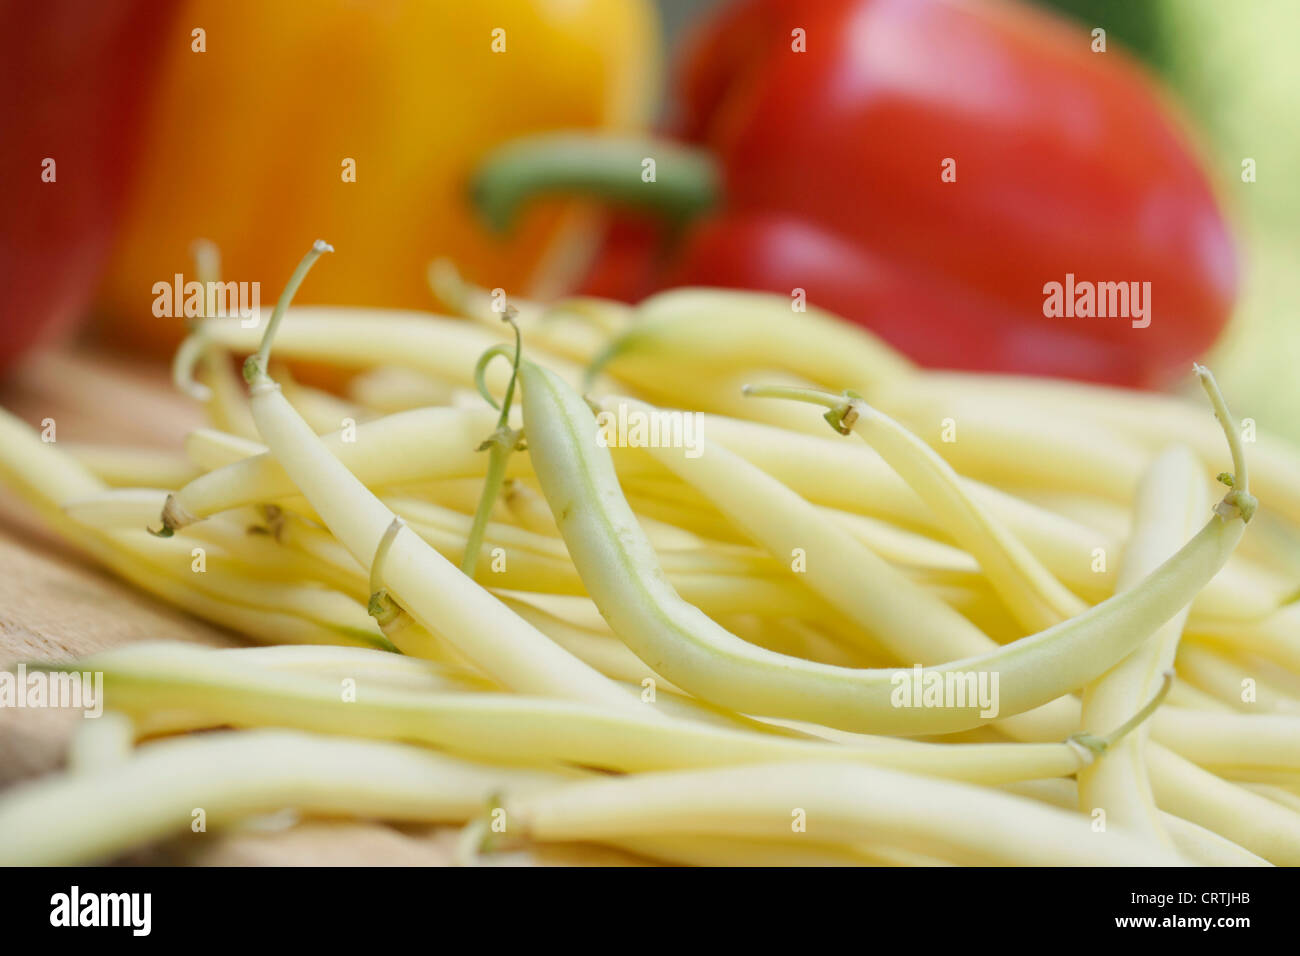 Yellow Wax Beans and Bell Peppers Stock Photo